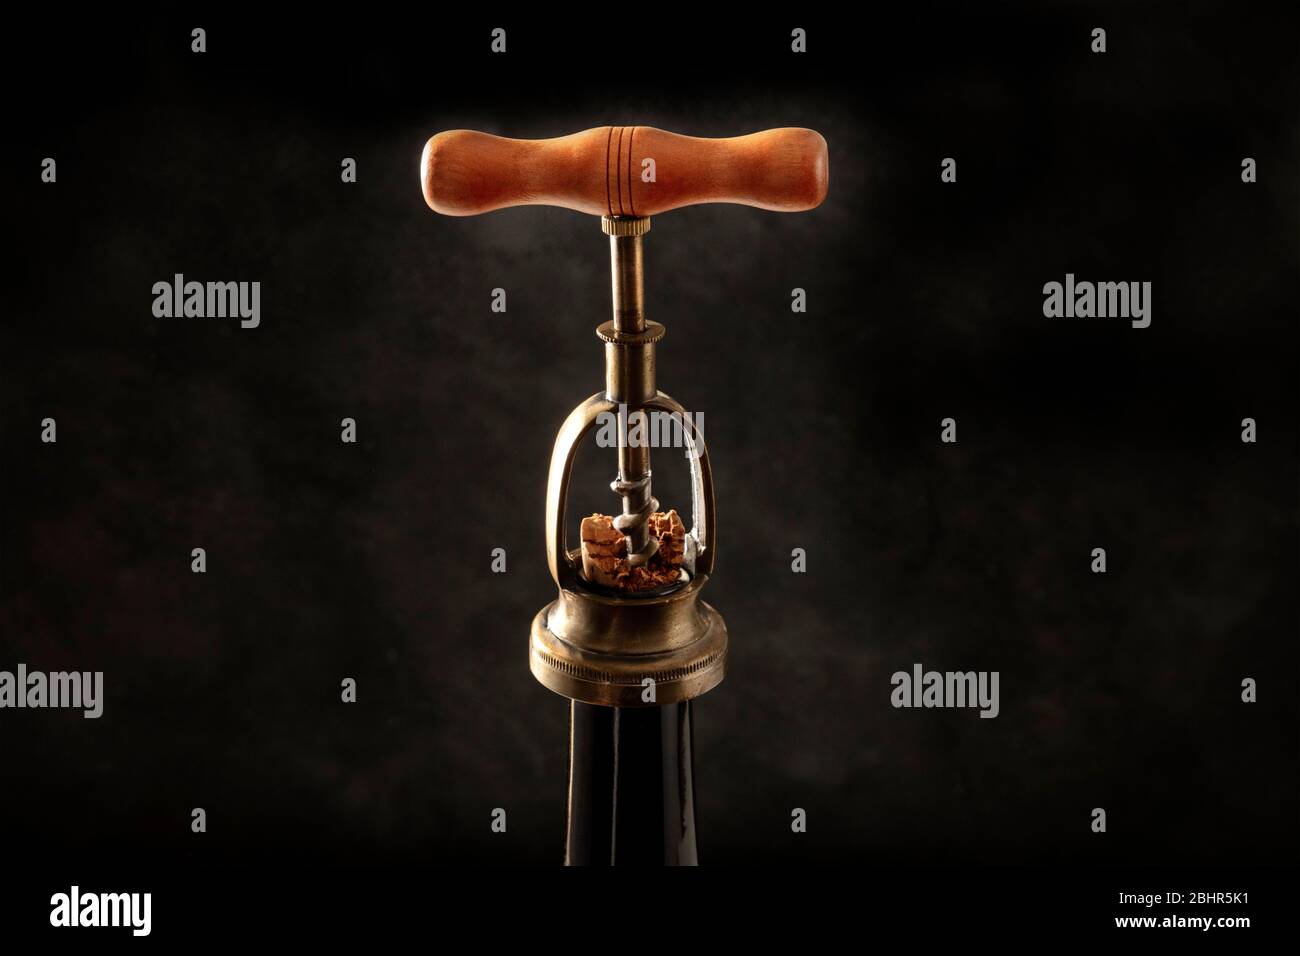 Wine design template. A vintage corkscrew, pulling out a cork from a bottle on a black background Stock Photo